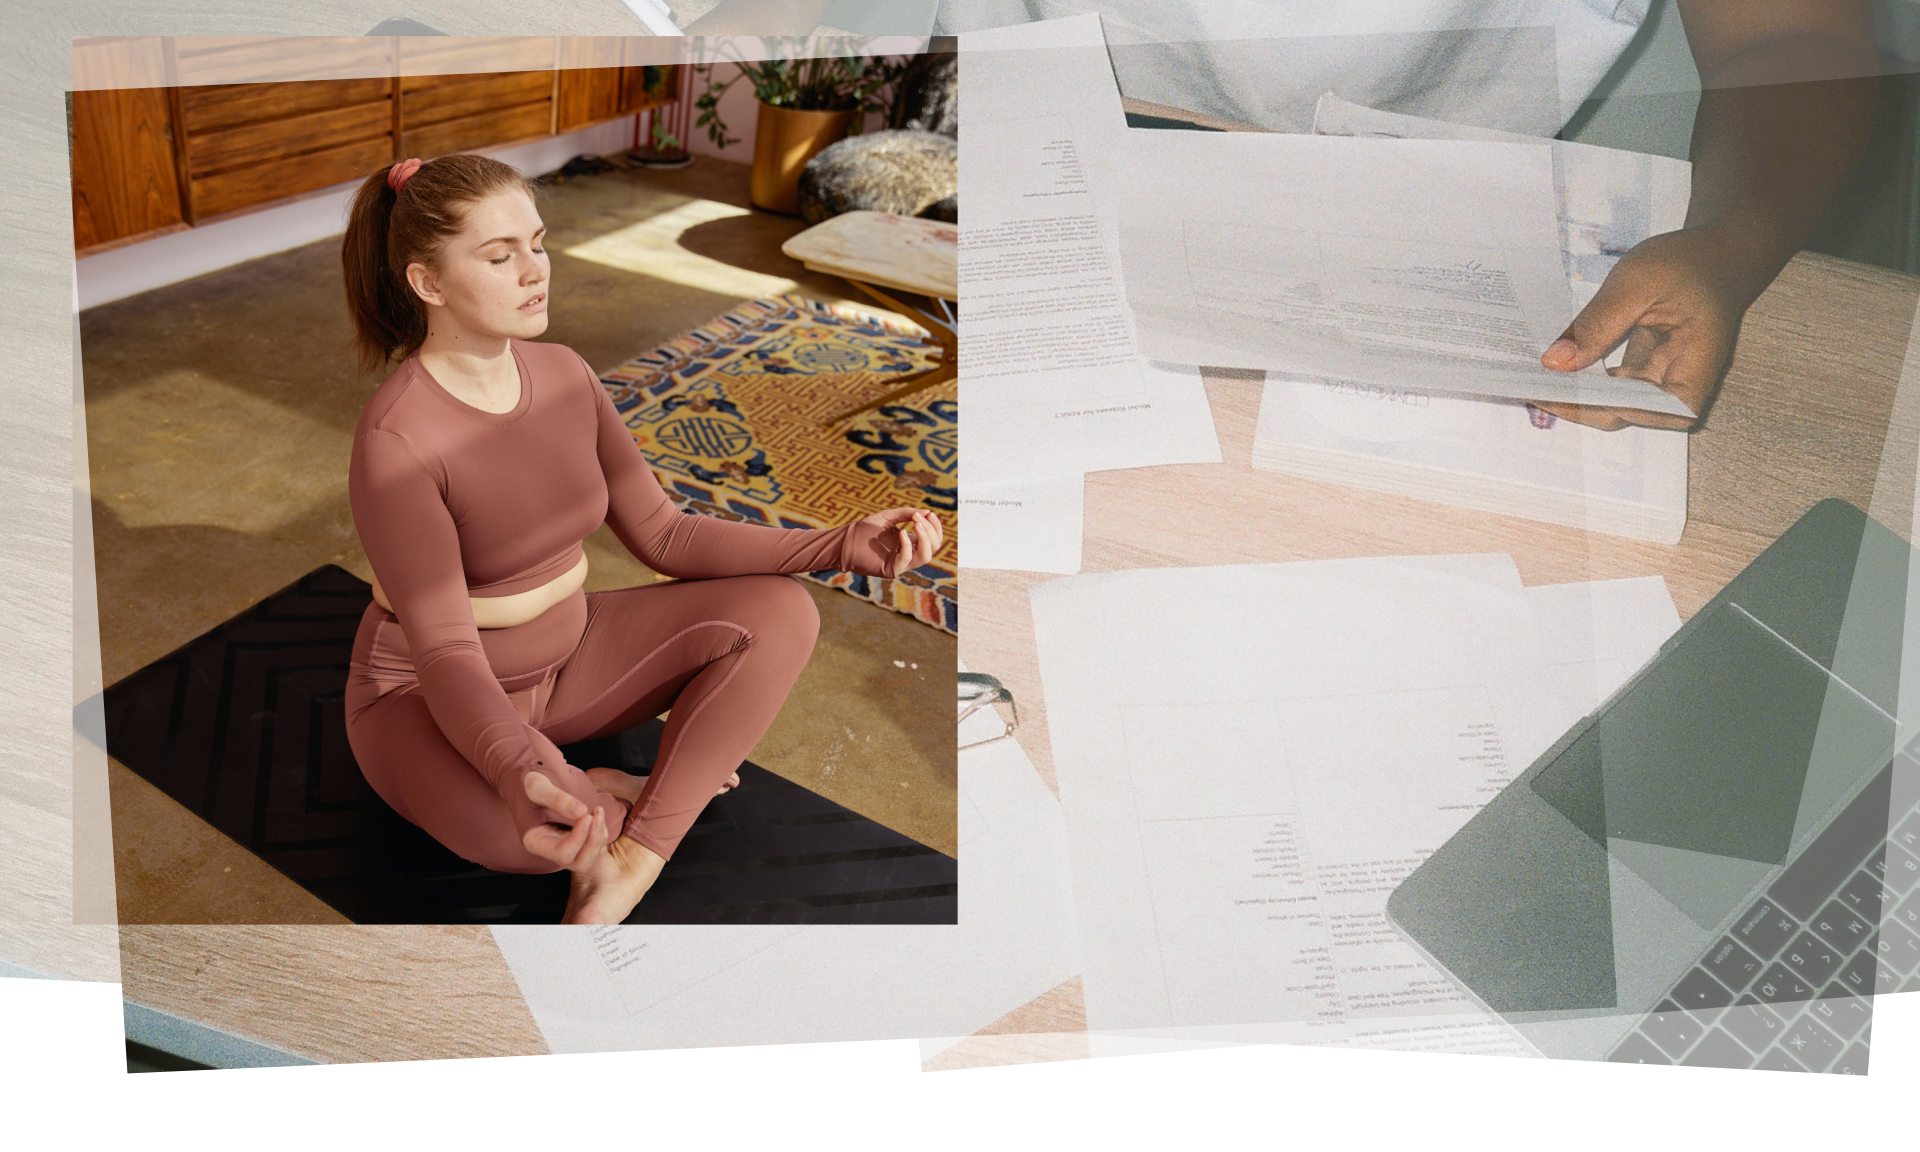 Stacked images of hands leafing through papers and a woman doing yoga.